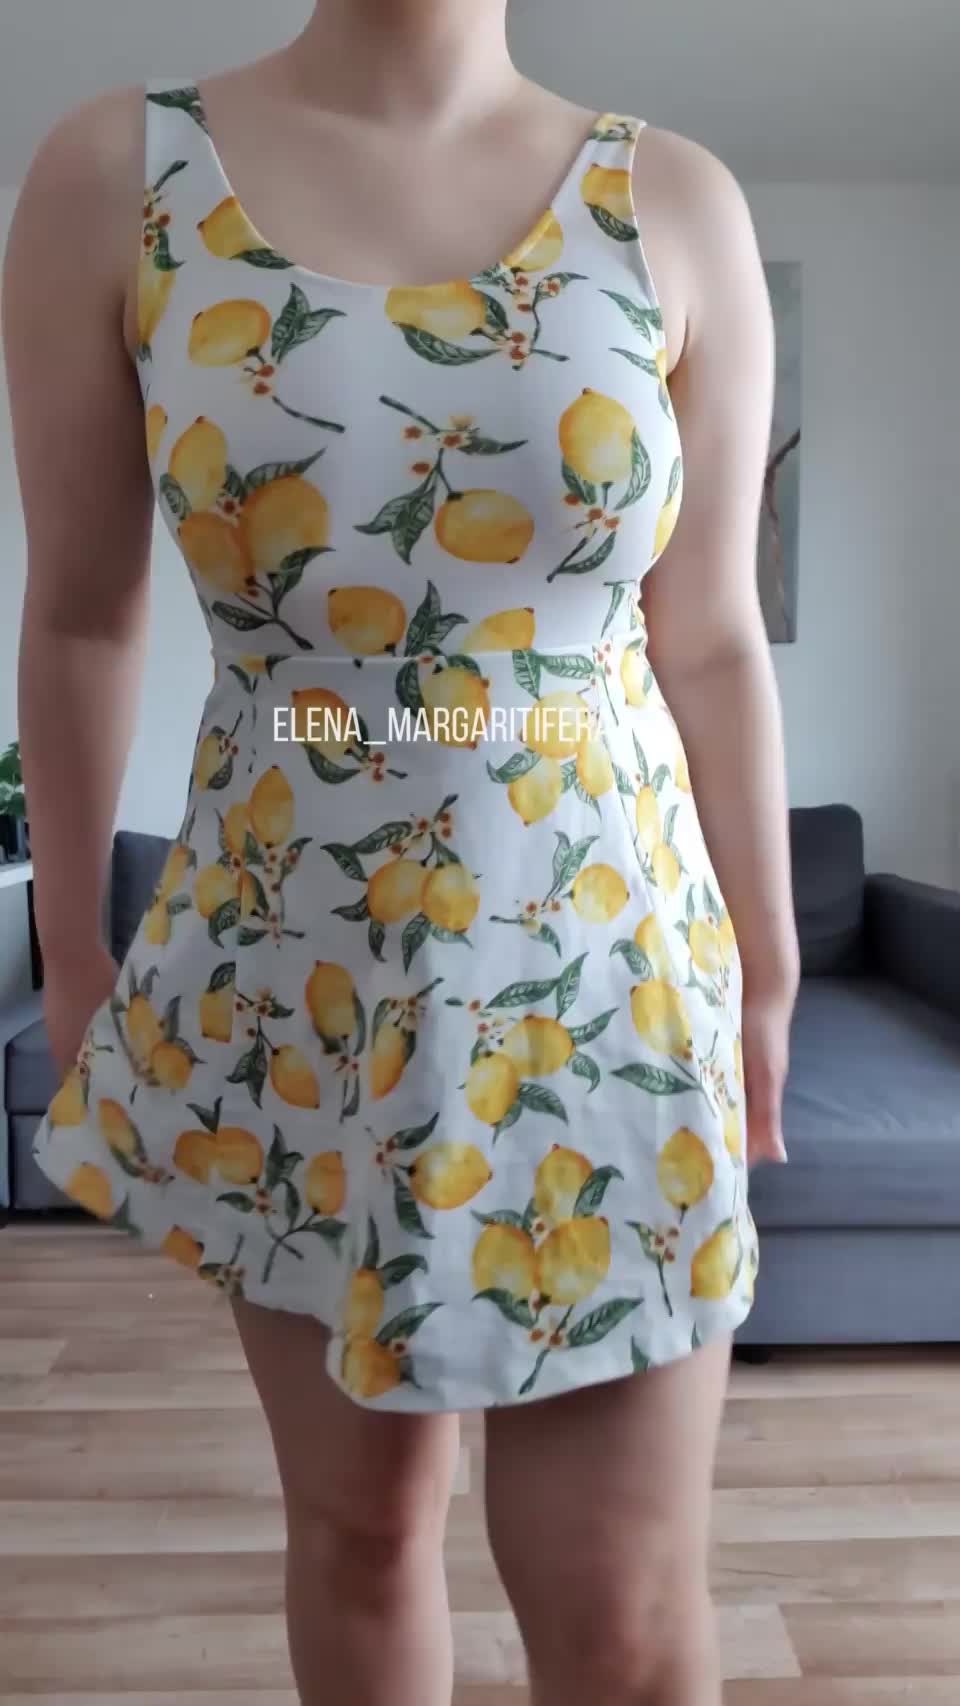 Wearing nothing under my dress means you can fuck me whenever you want